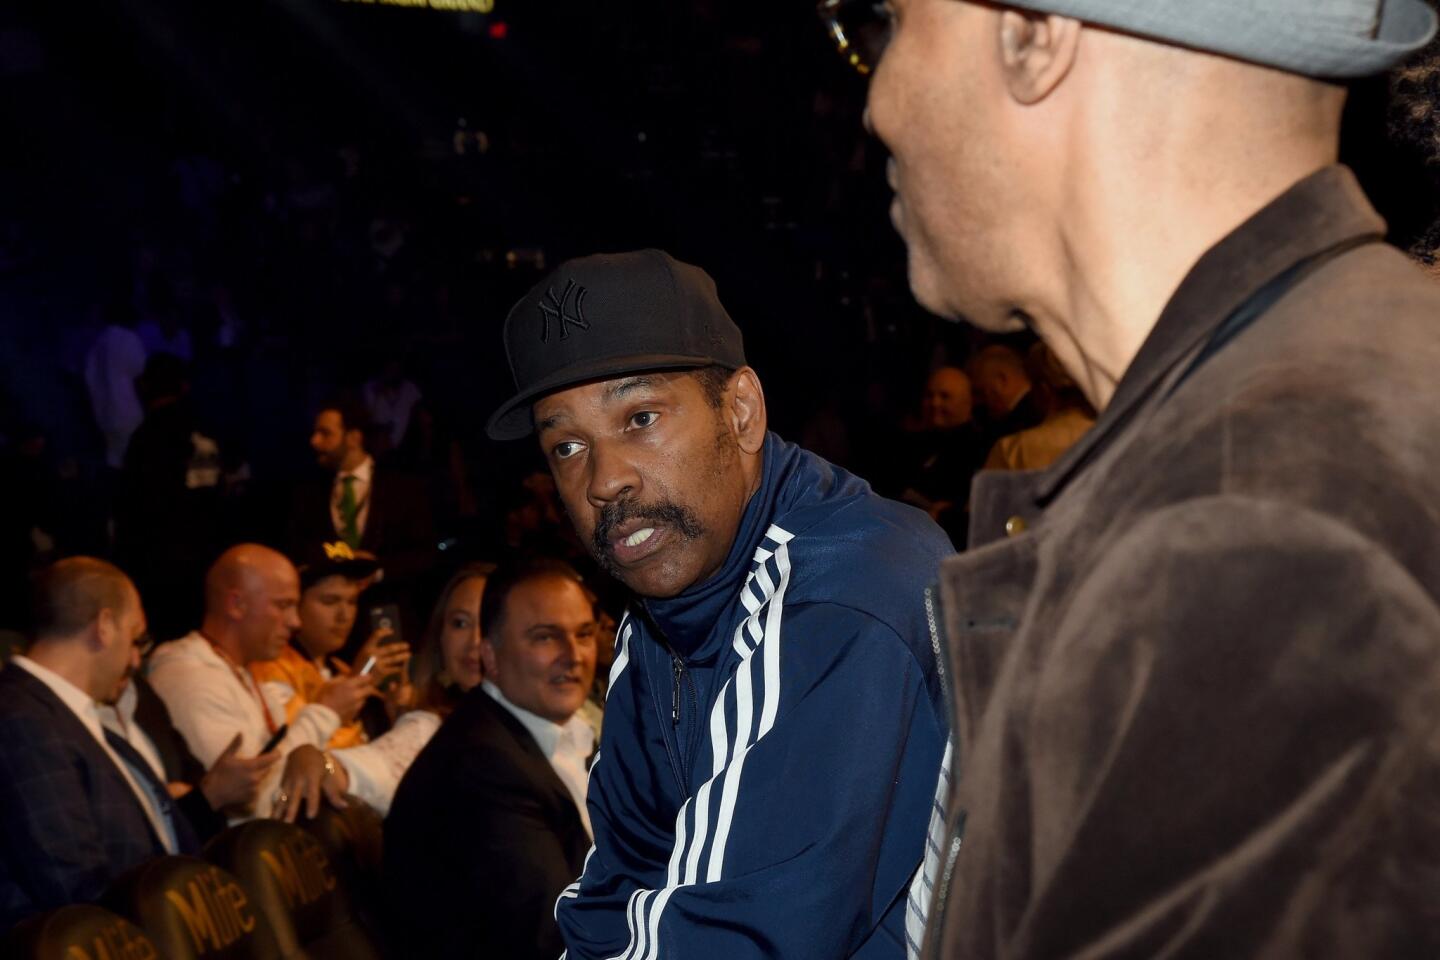 Ringside At "Mayweather VS Pacquiao" Presented By SHOWTIME PPV And HBO PPV